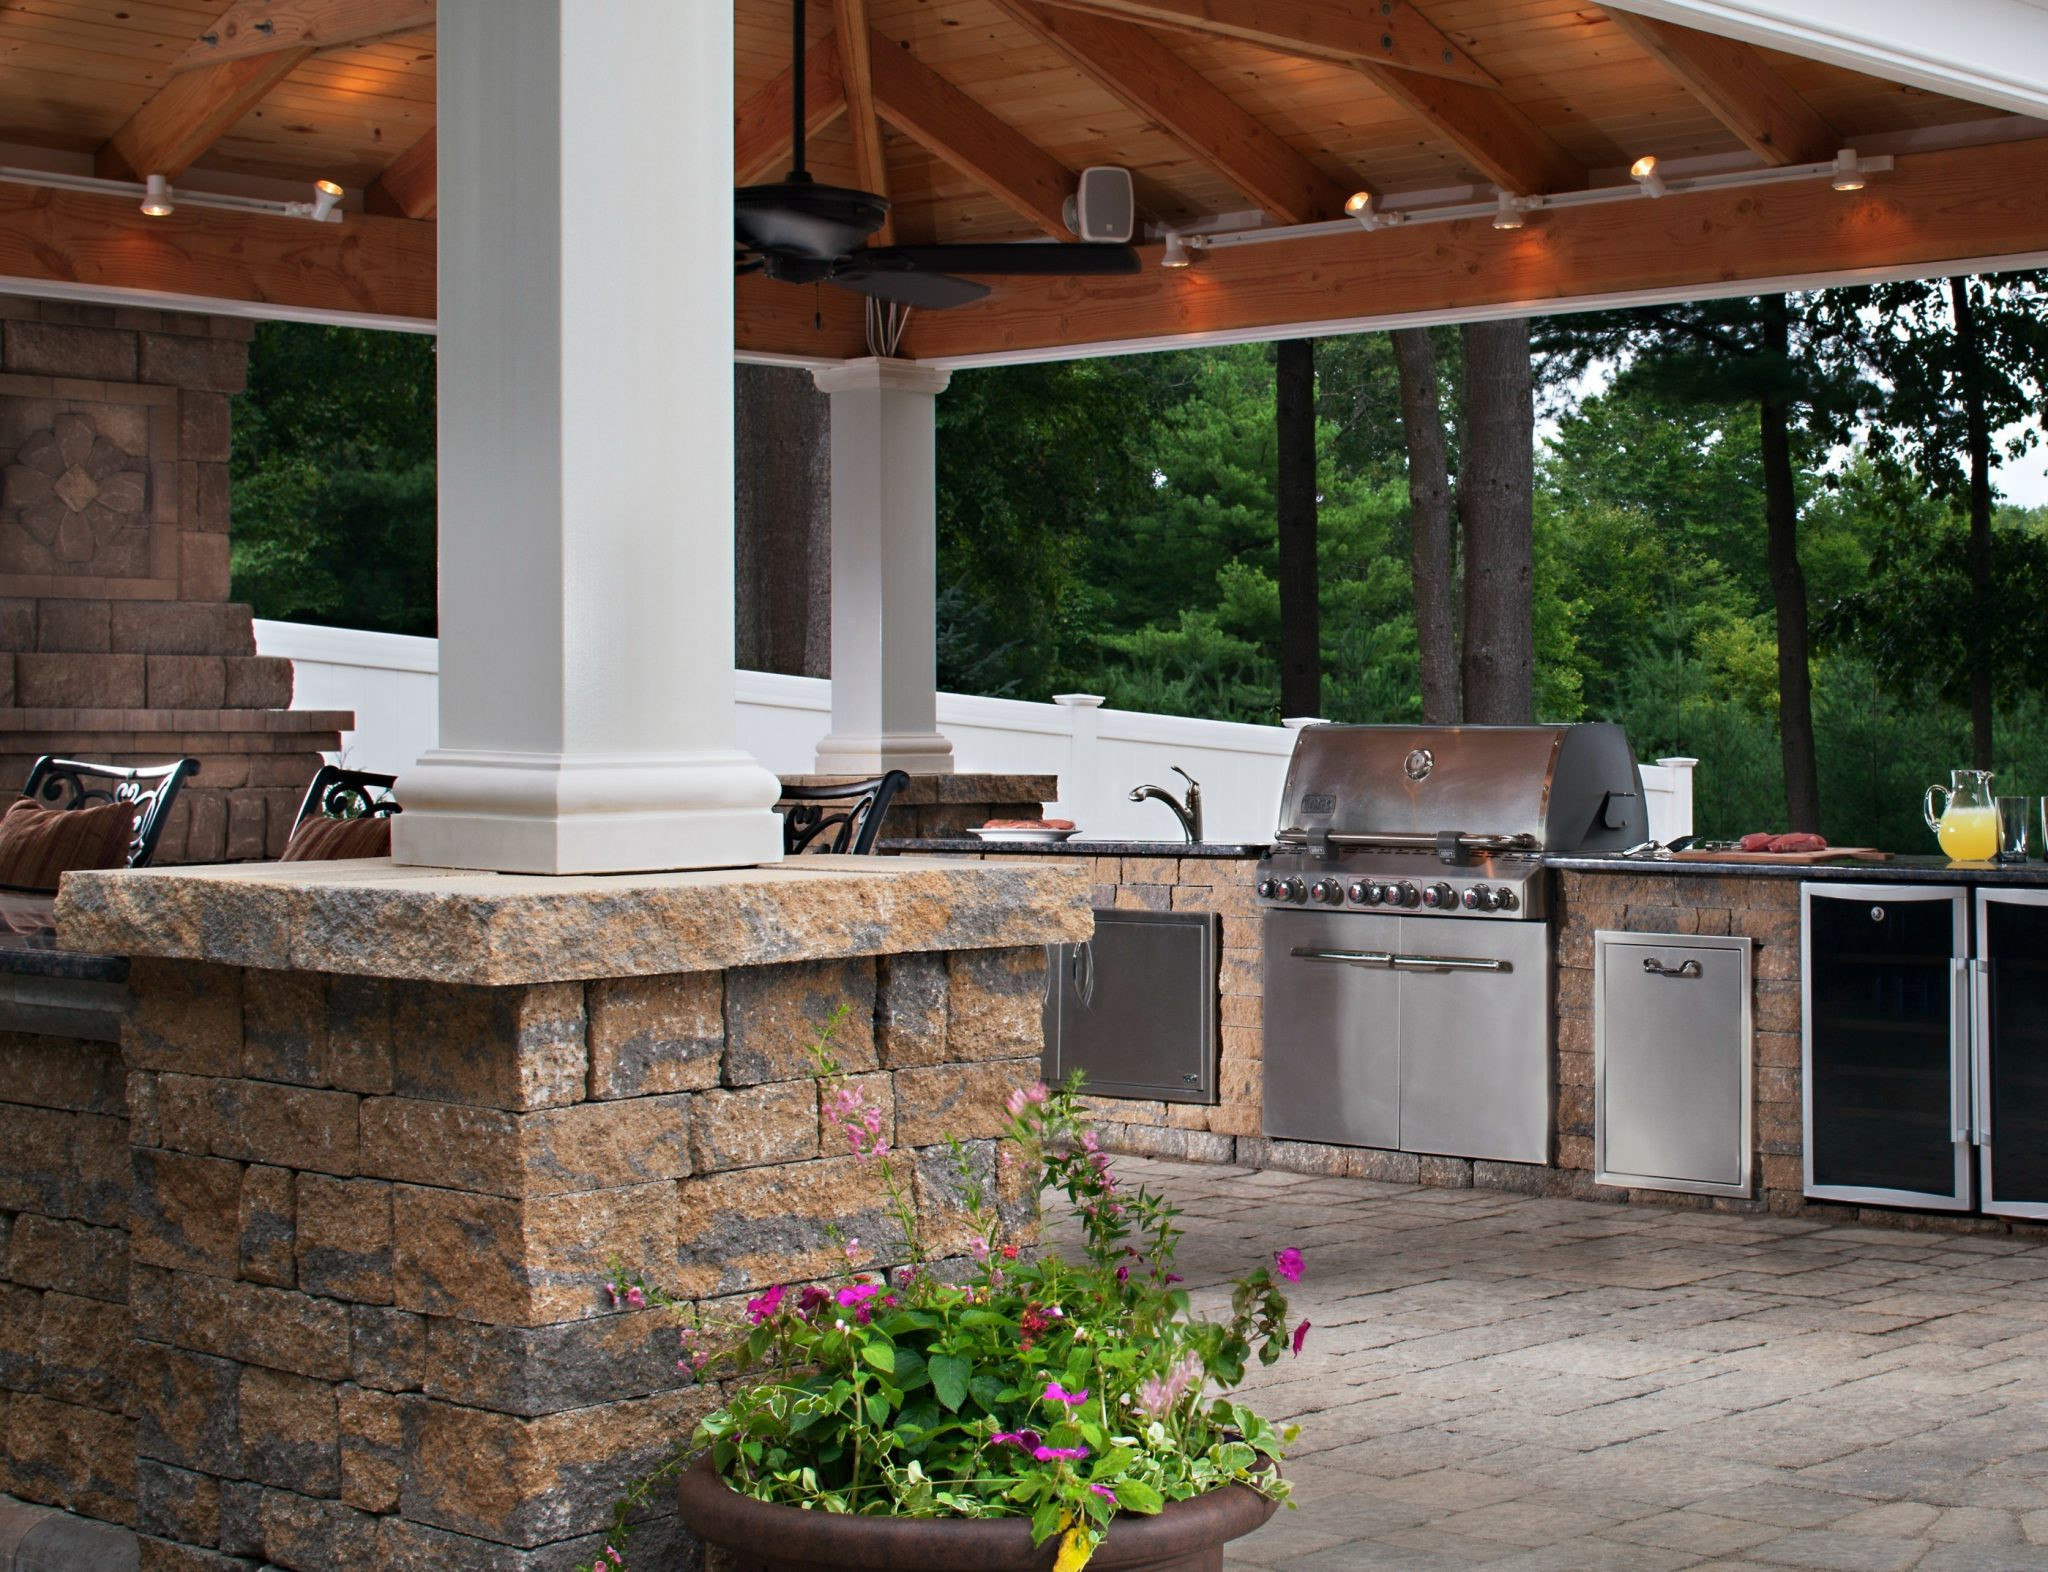 Patio Outdoor Kitchen Luxury Outdoor Kitchen Trends 9 Hot Ideas for Your Backyard